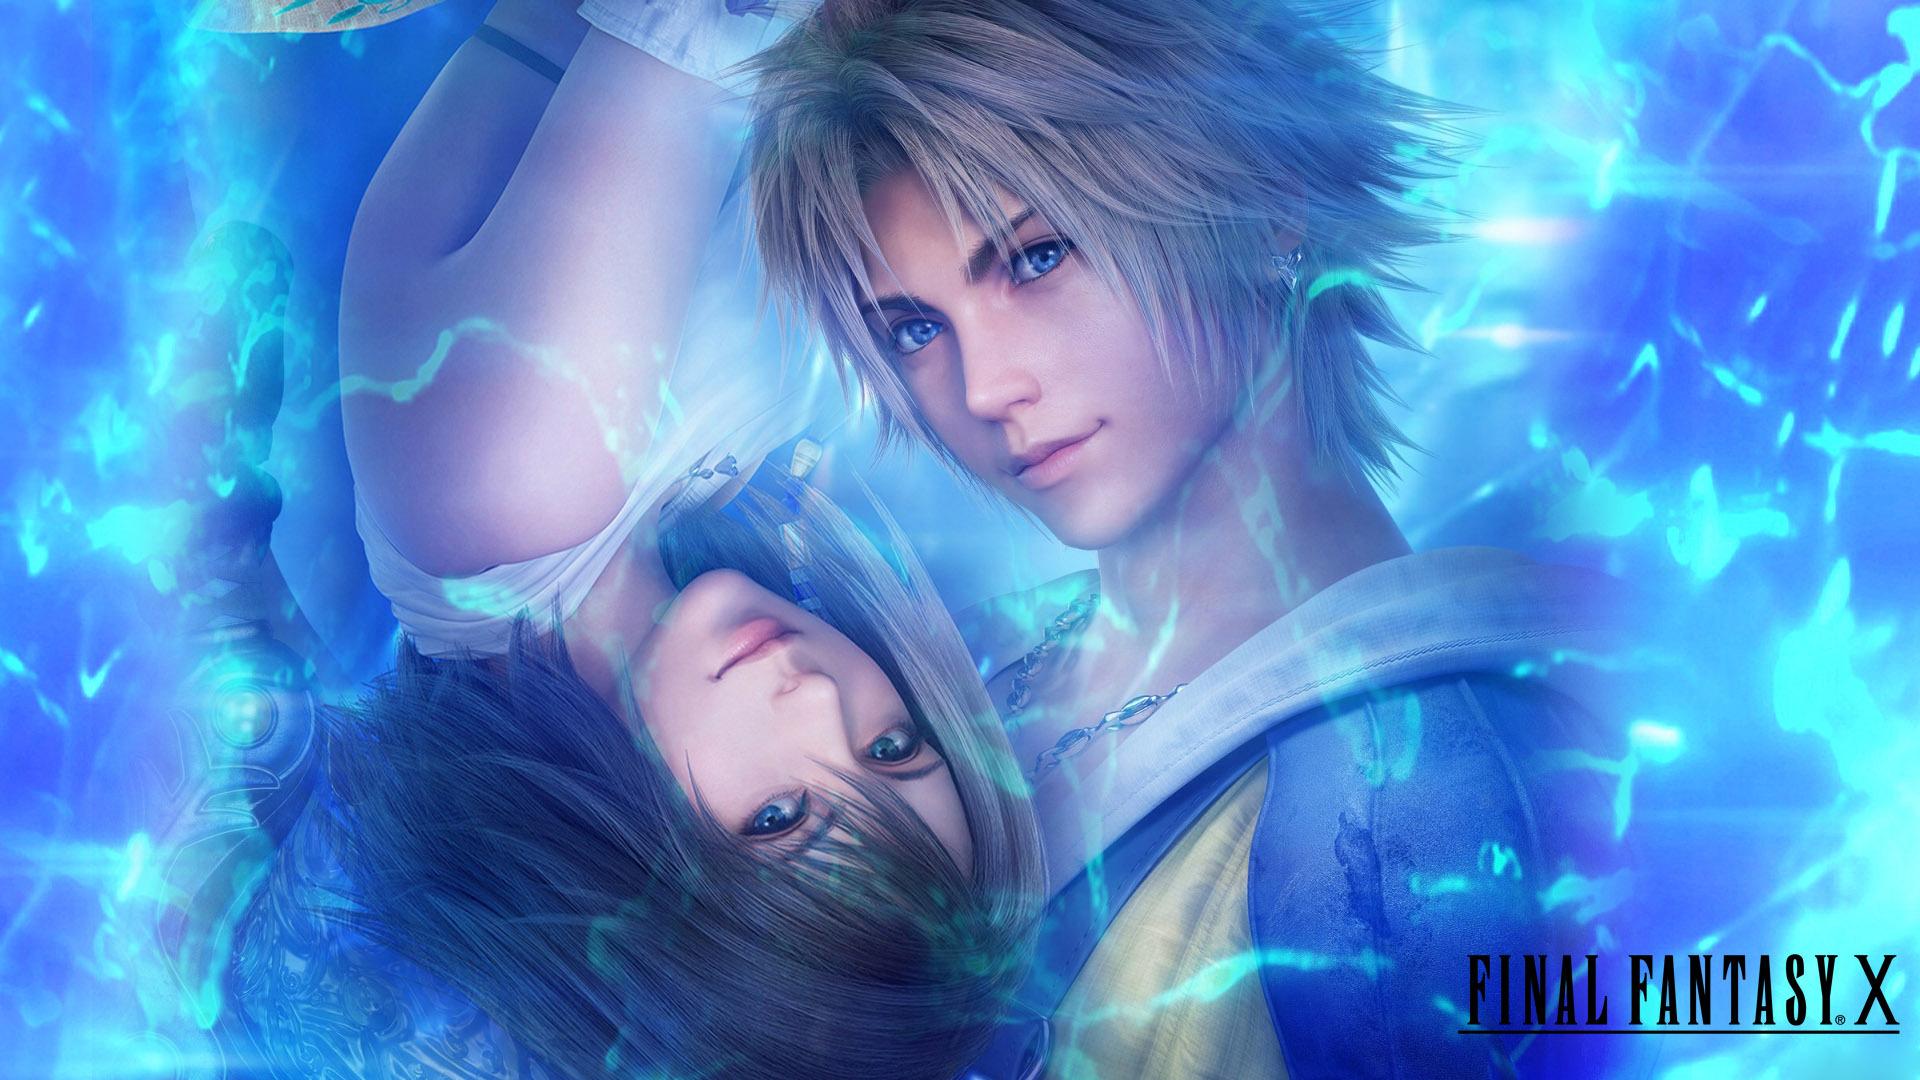 Final Fantasy X 3 Will Be A Massive Project With Hundreds Of Staff Says Kitase